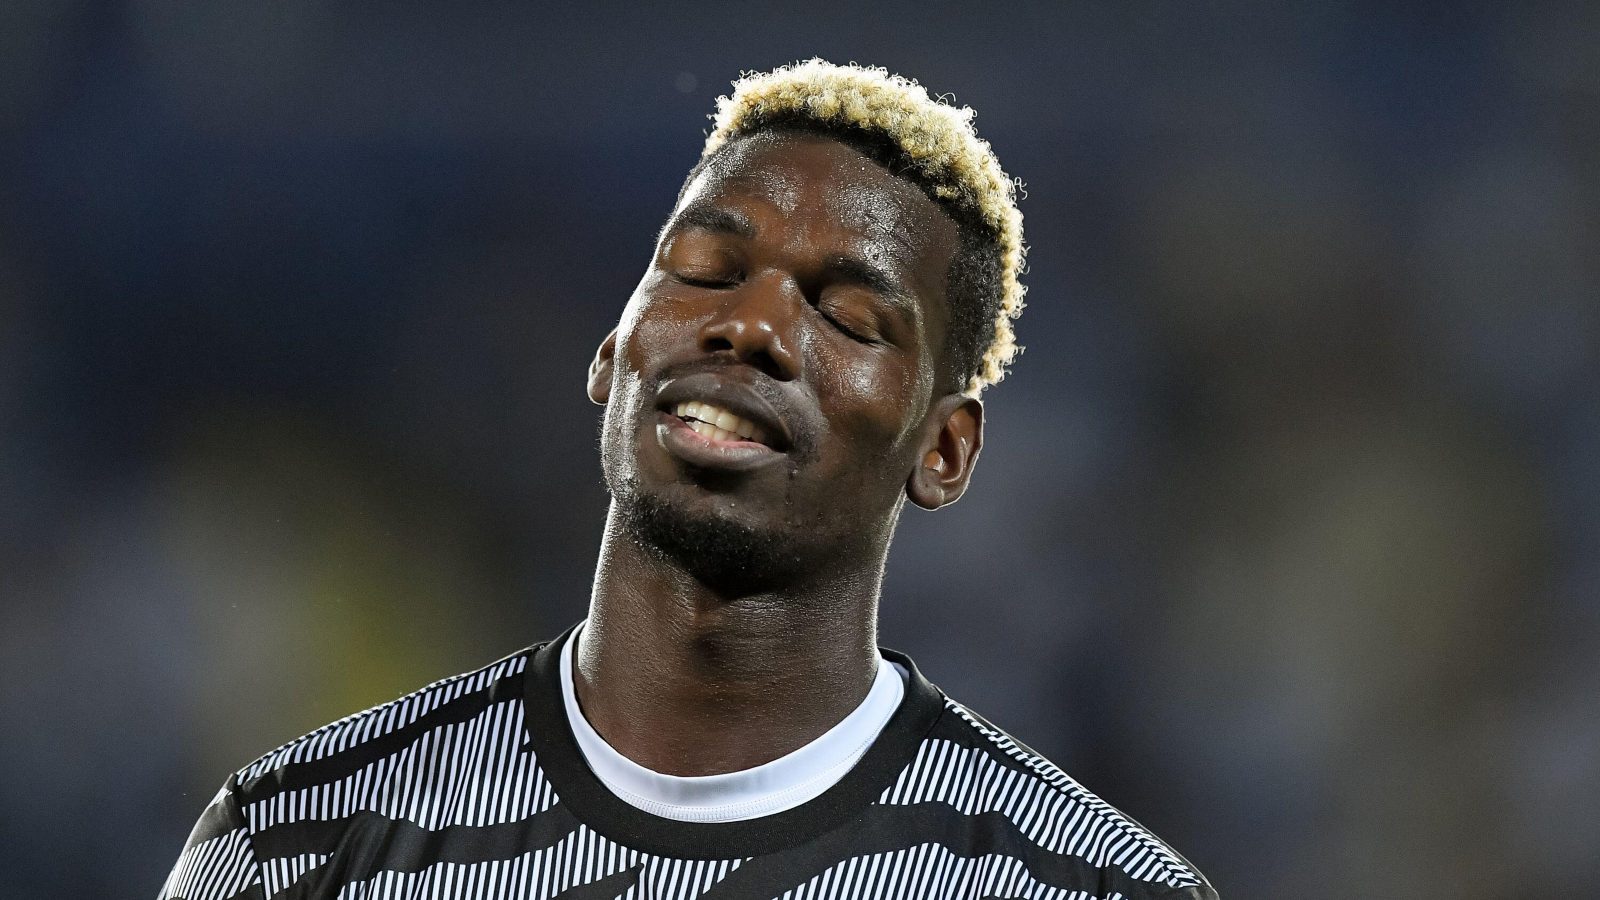 Paul Pogba Receives 4-Year Ban For Doping Violation, Plans To Appeal